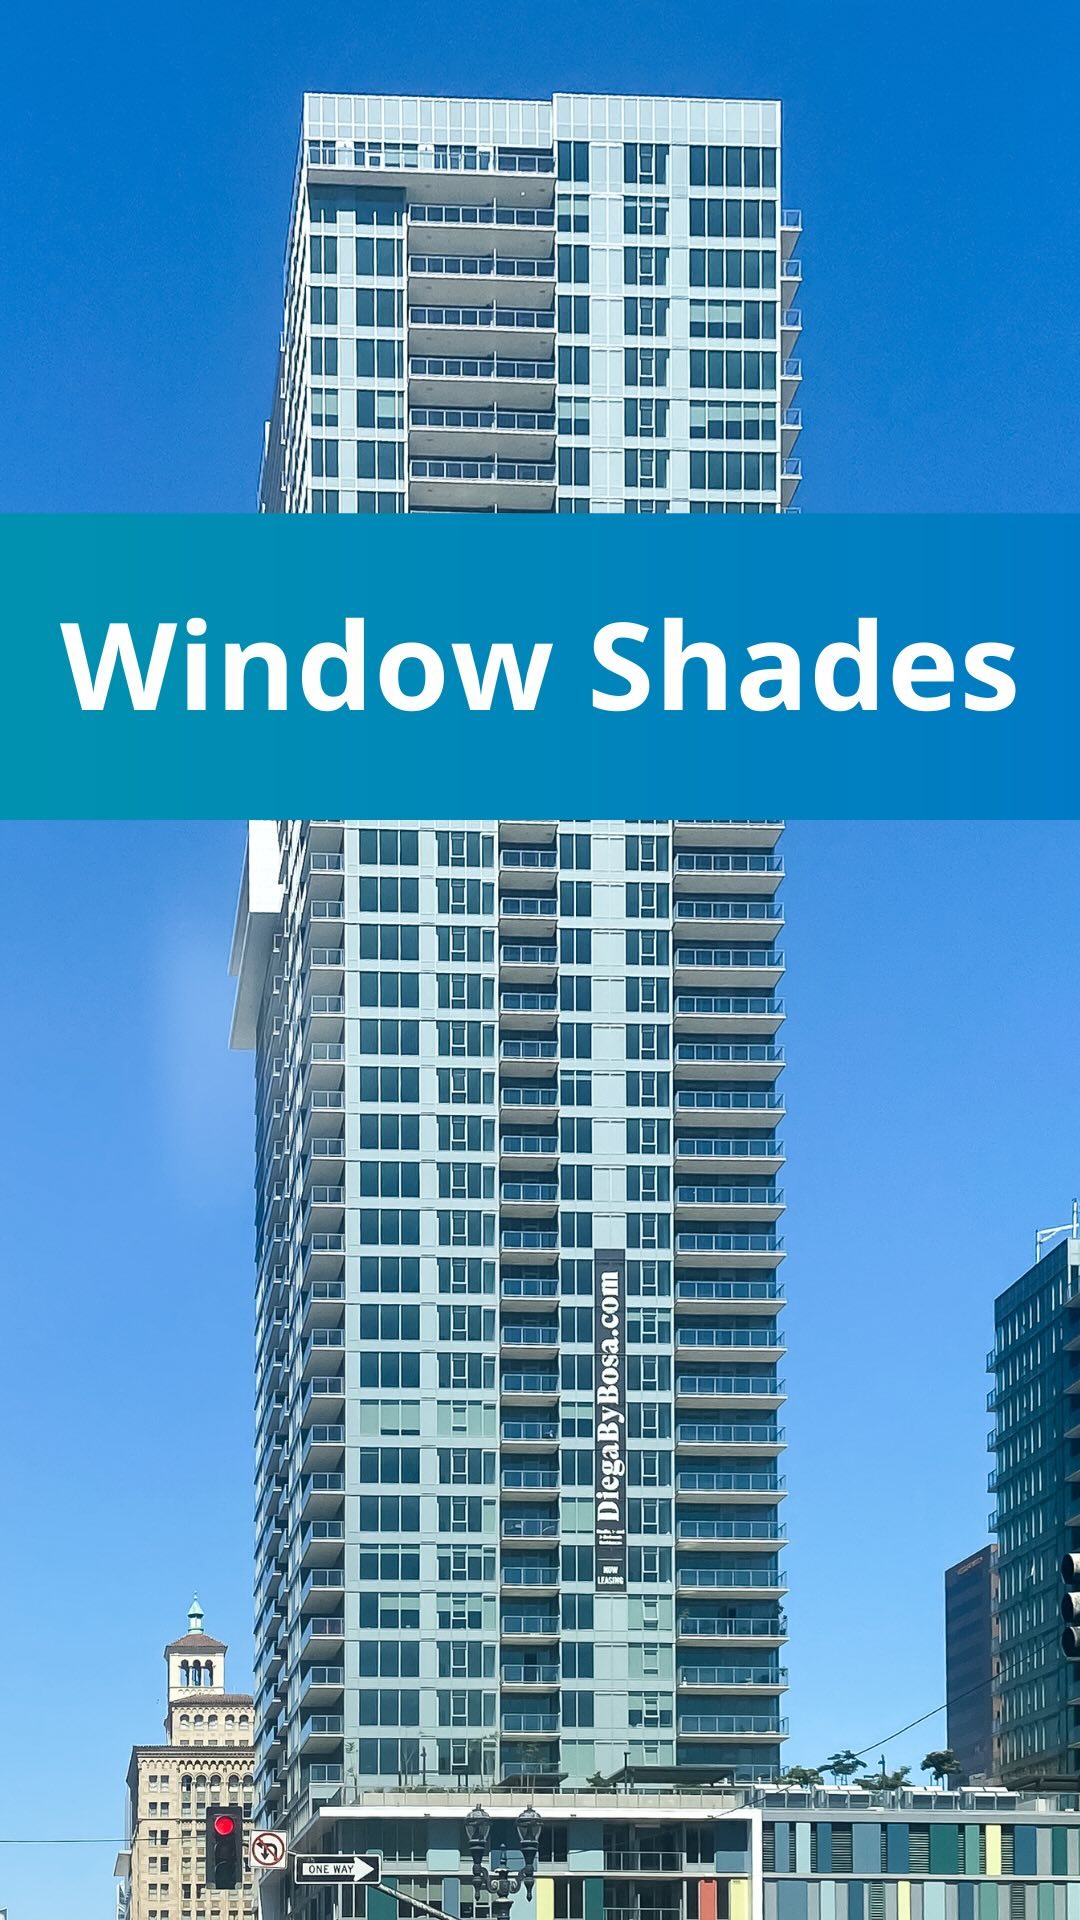 Roll-A-Shade window shades. 😎 #architecture #highrise #rollershades #motorizedshades #welding